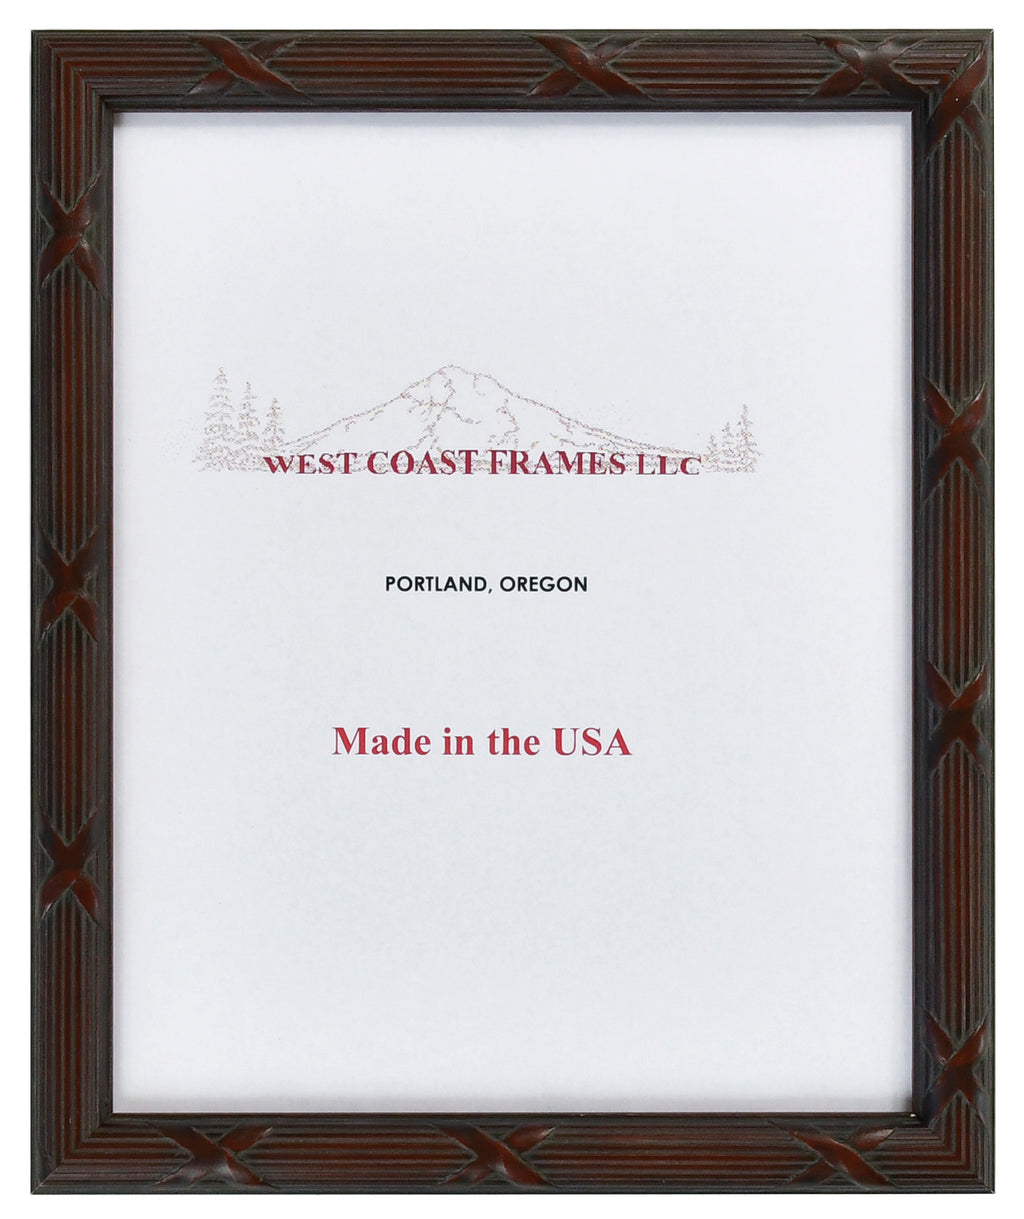 272205 - Ornate Dark Walnut Picture Frame with Bow Design - 3/4" wide - Clear Glass